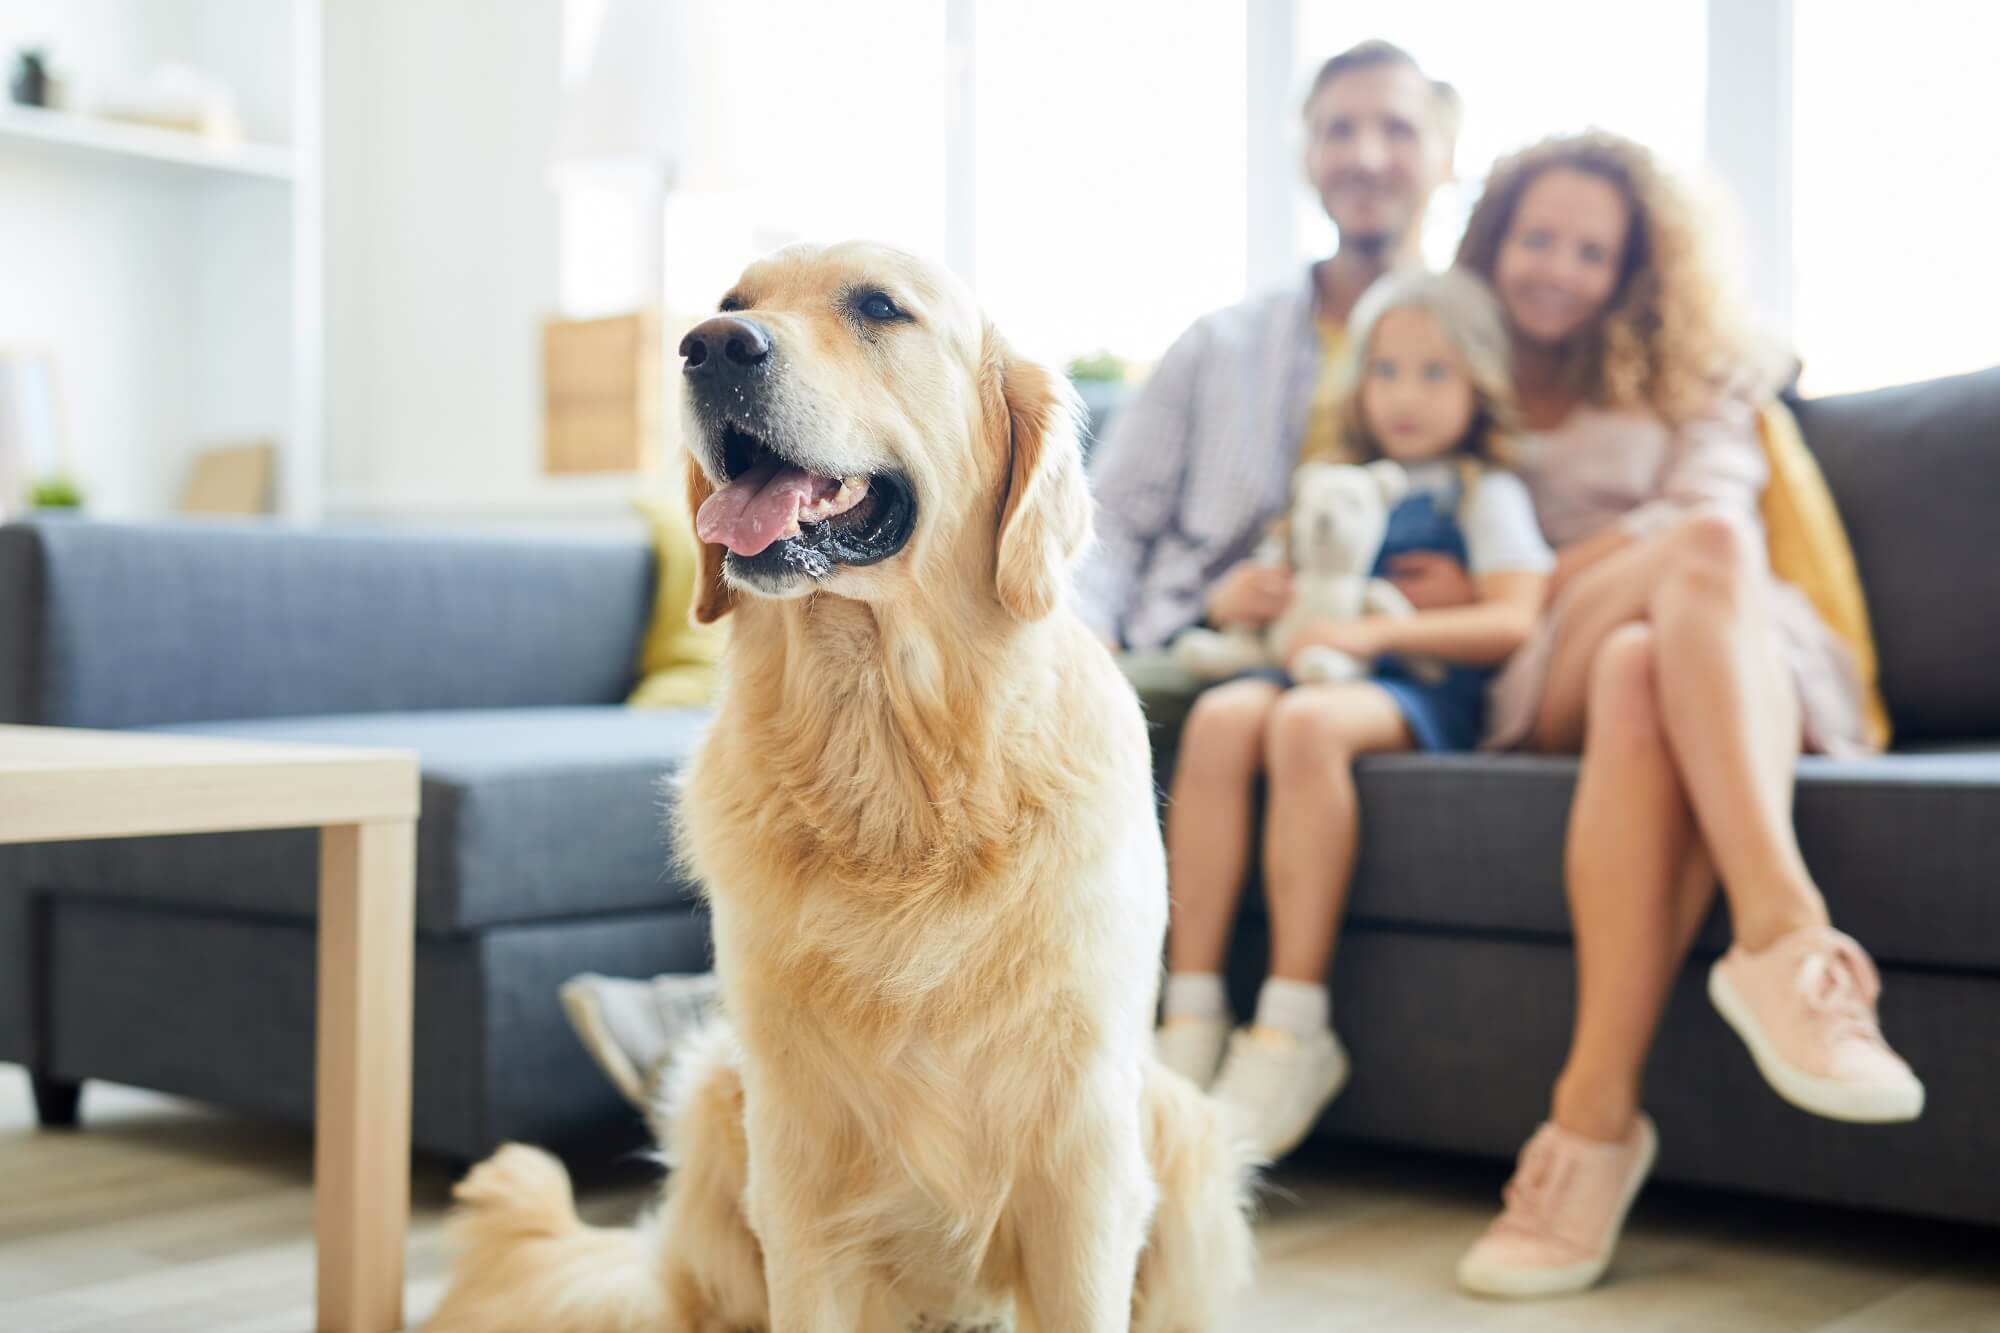 Latest Aggressive Dog Breeds Not Allowed In Apartments Ideas in 2022